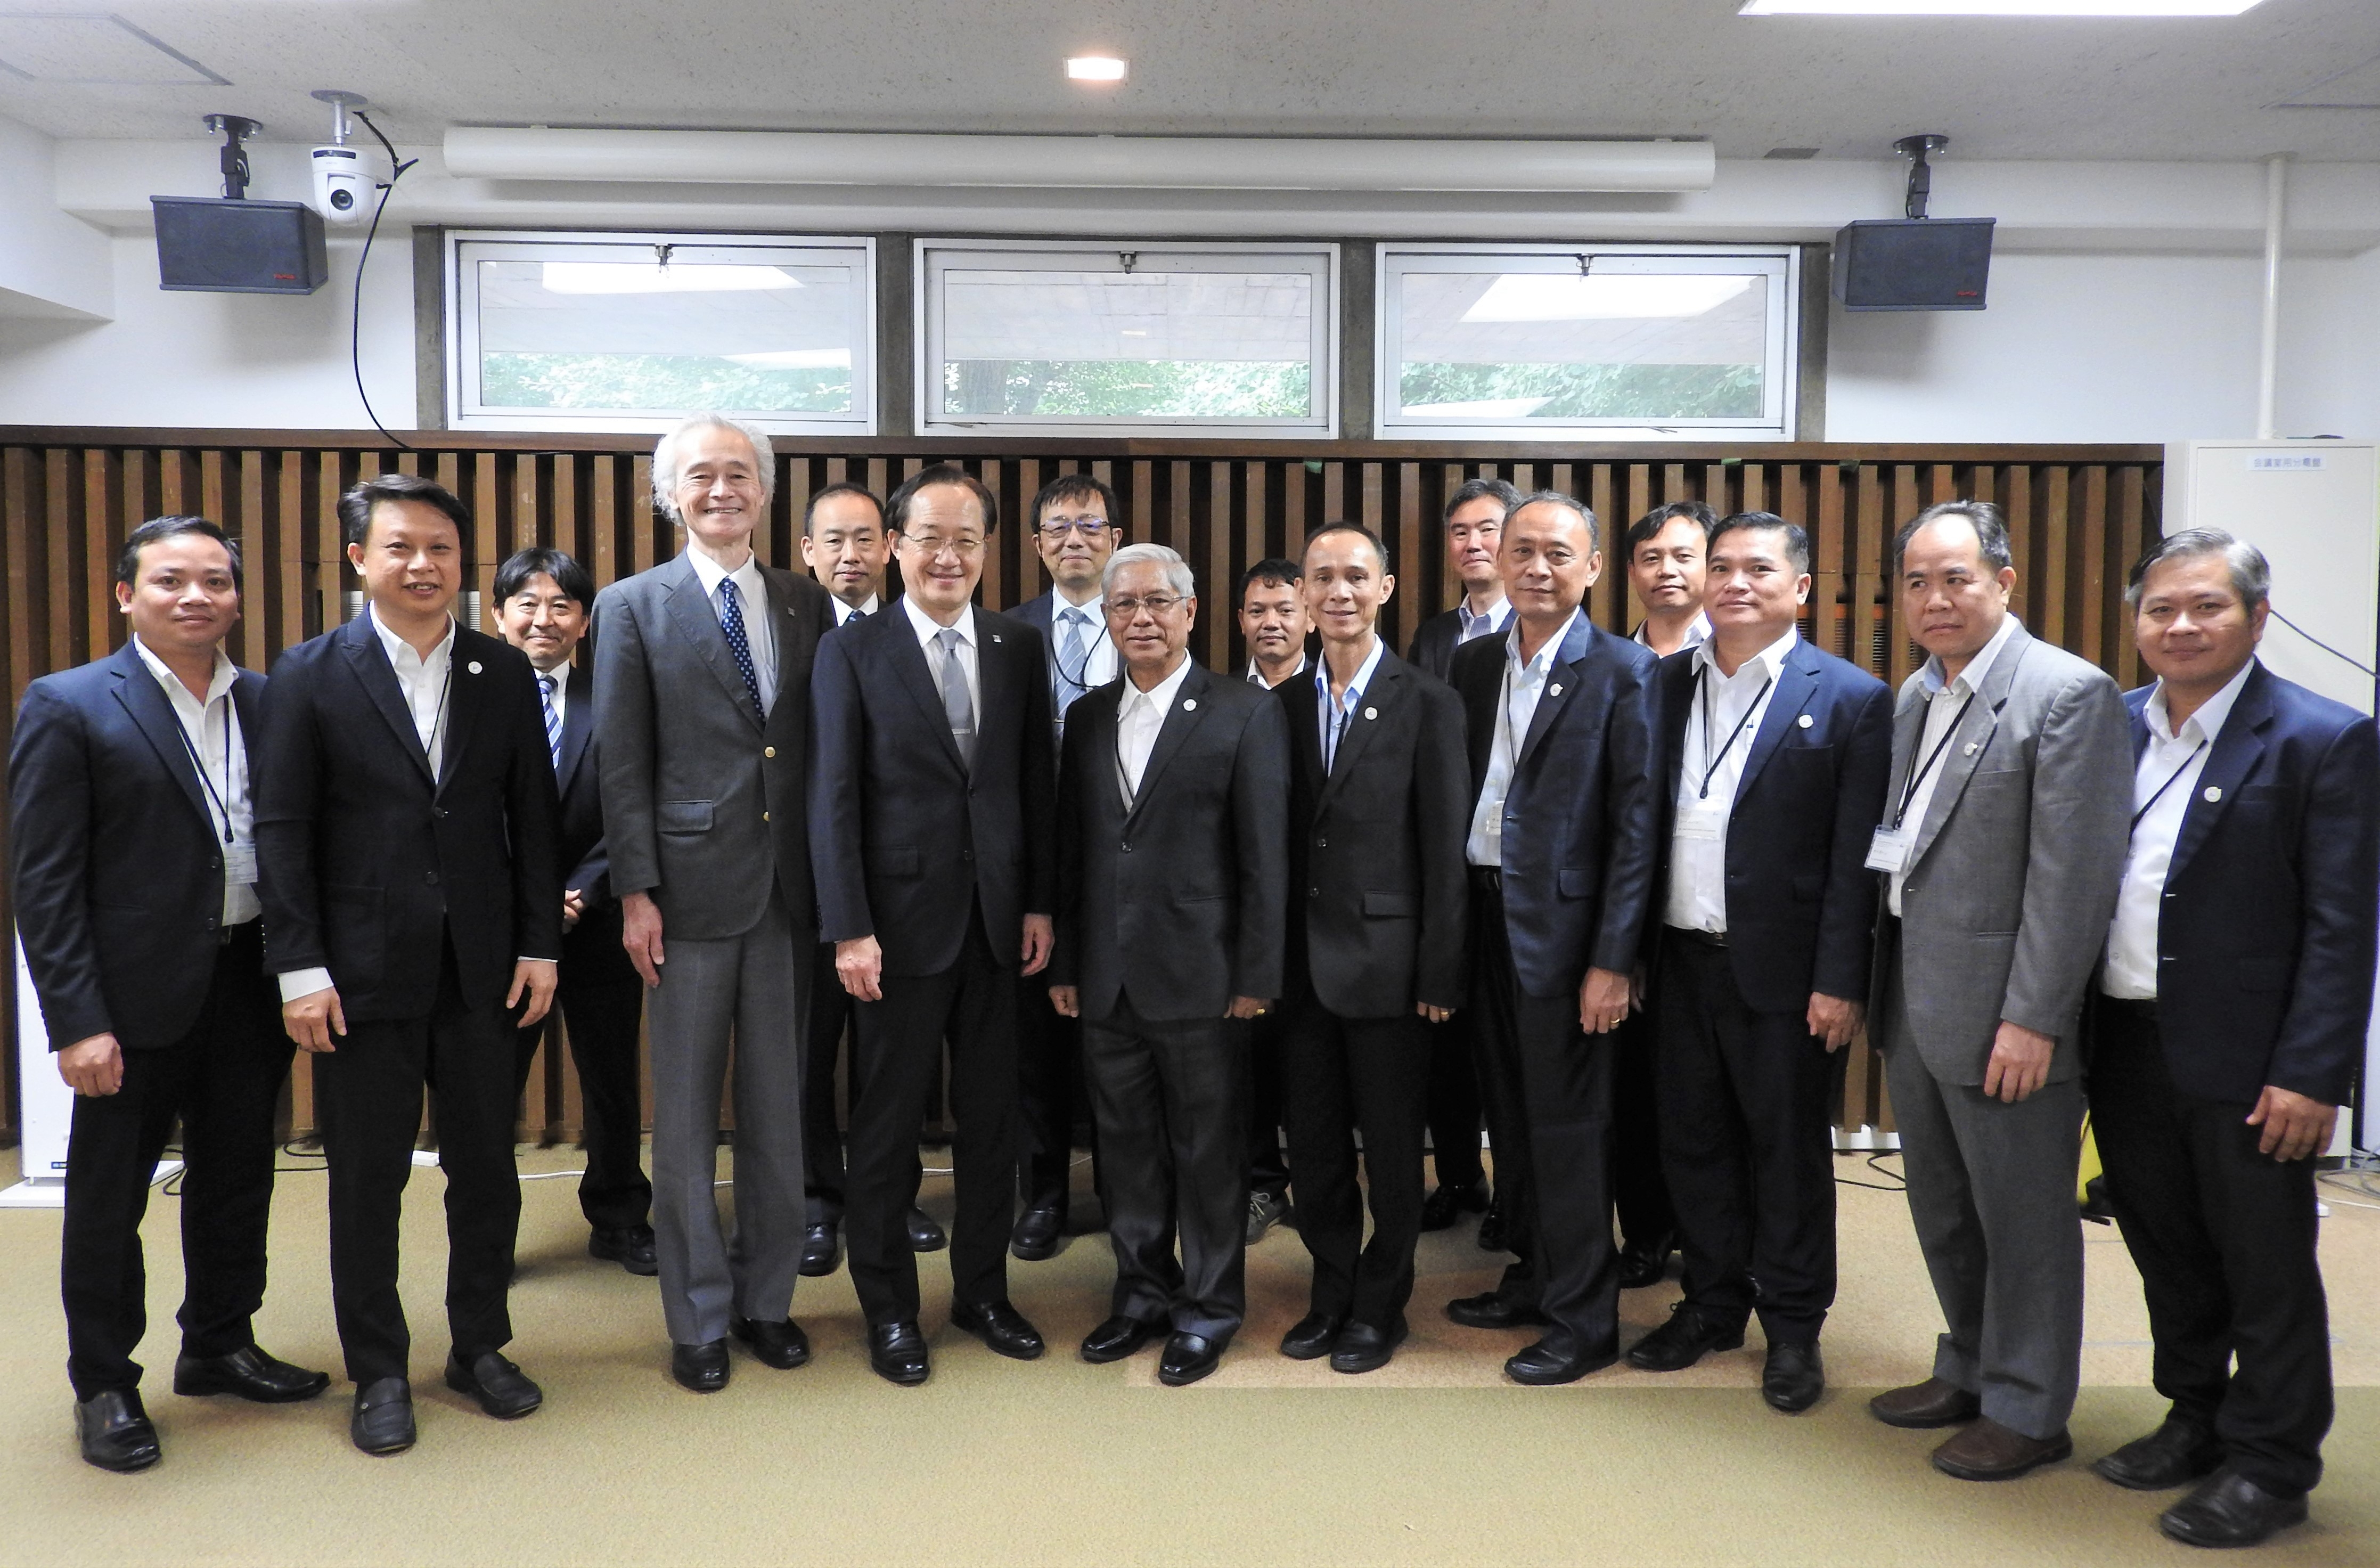 Delegation from Laos Higher Education Department, Ministry of Education and Sports and National University of Laos visits Tokyo Tech